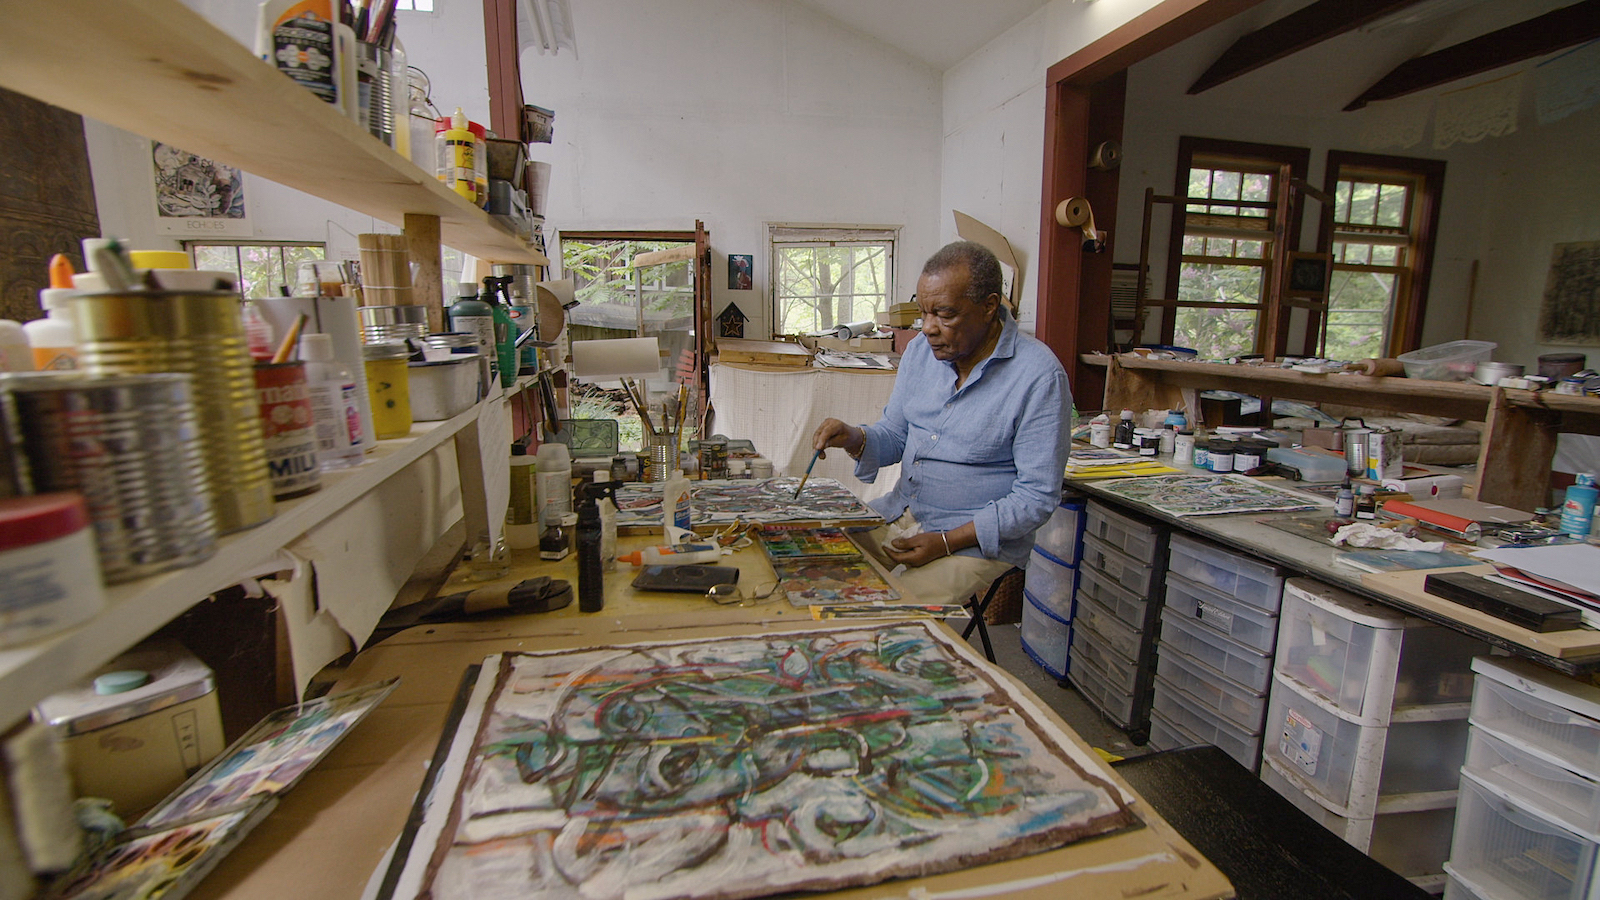 image of David Driskell painting in his studio